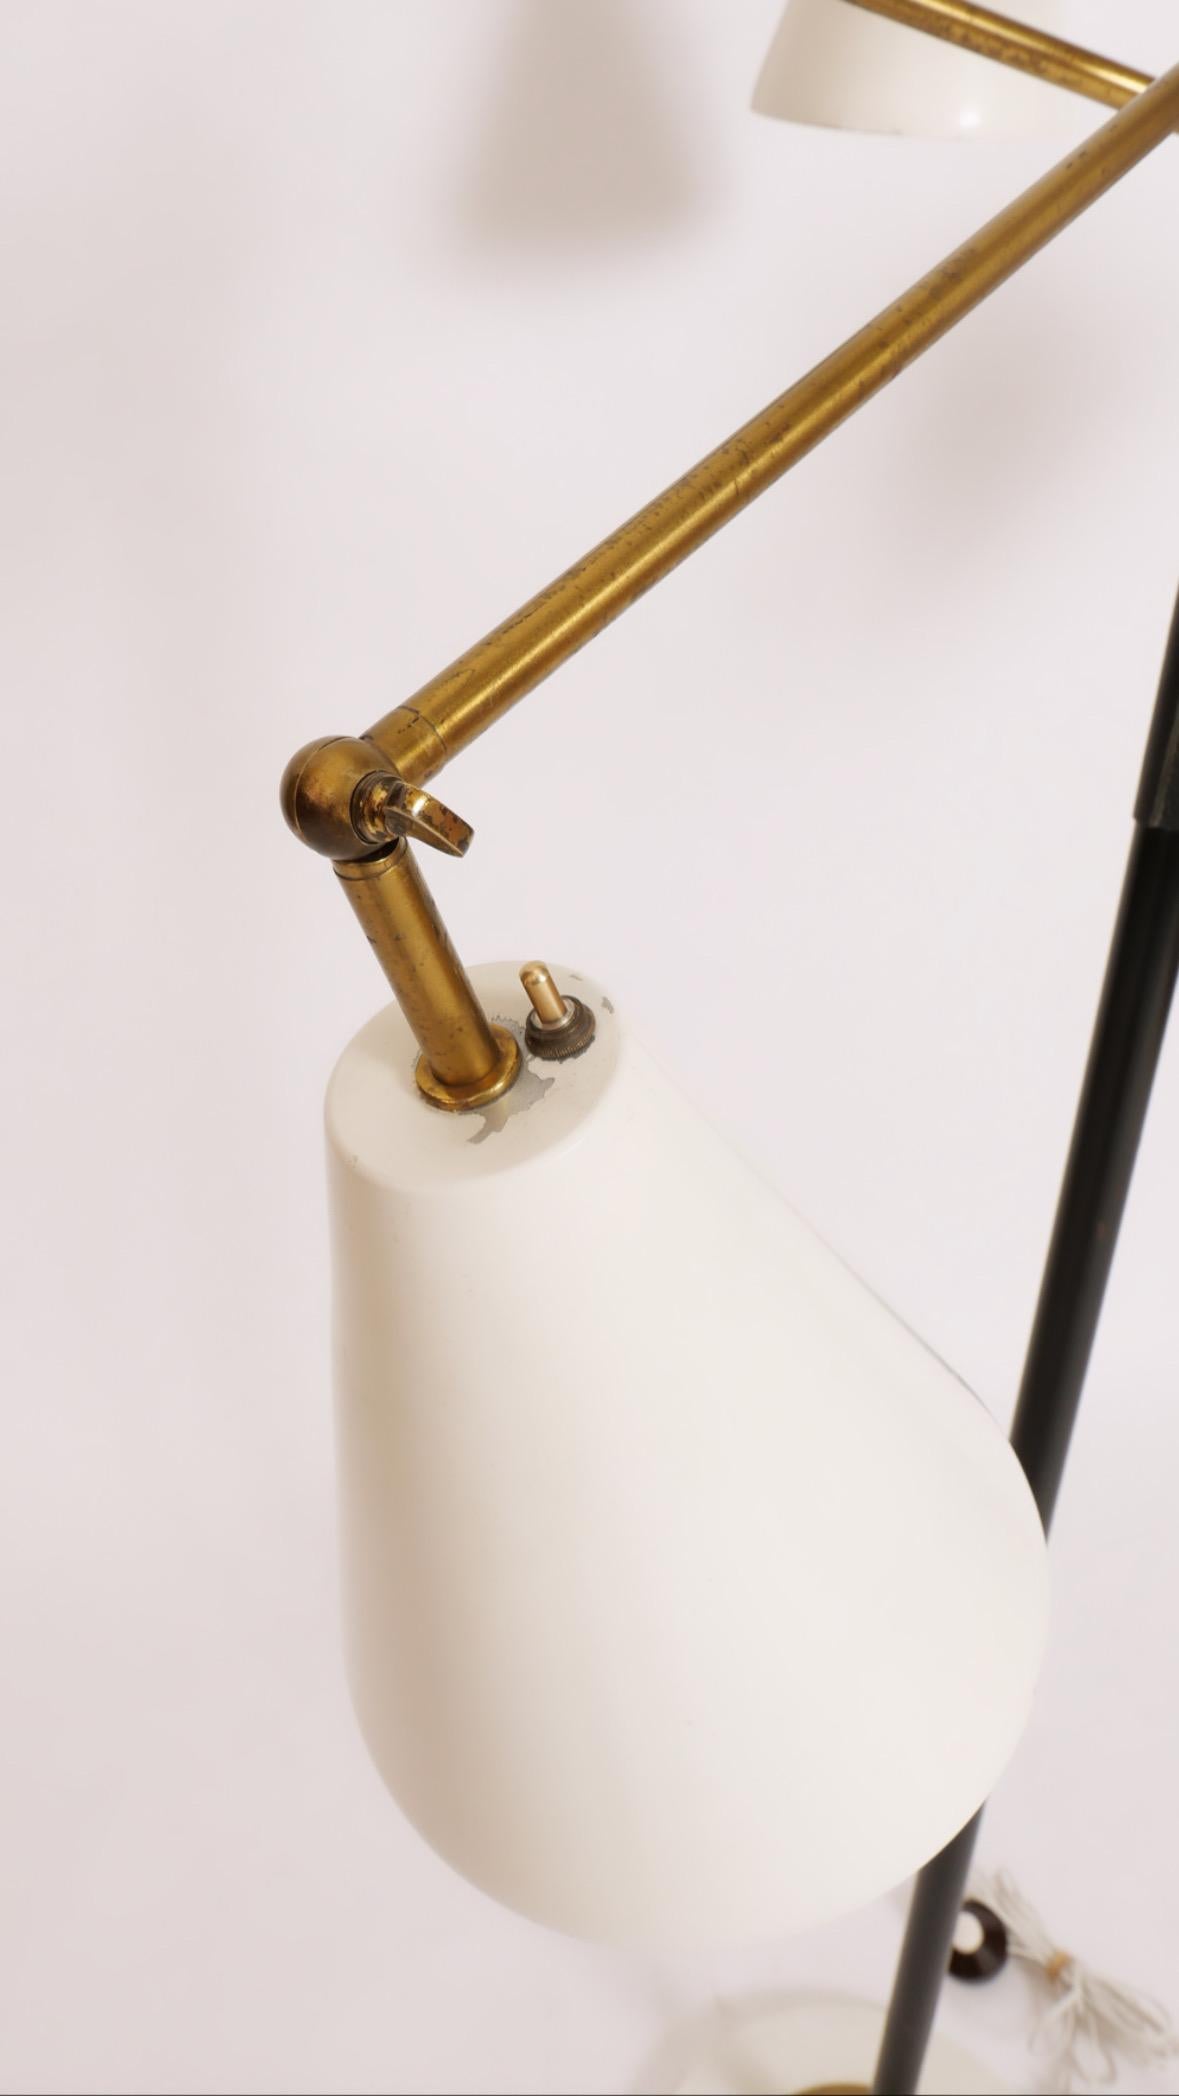 Iconic three-arm floor lamp in brass and black leather with marble base. Spun metal cone shades are factory-lacquered in original ivory paint. This lamp has been fully rewired and has new hand-stitched leather handles. The patina on the brass